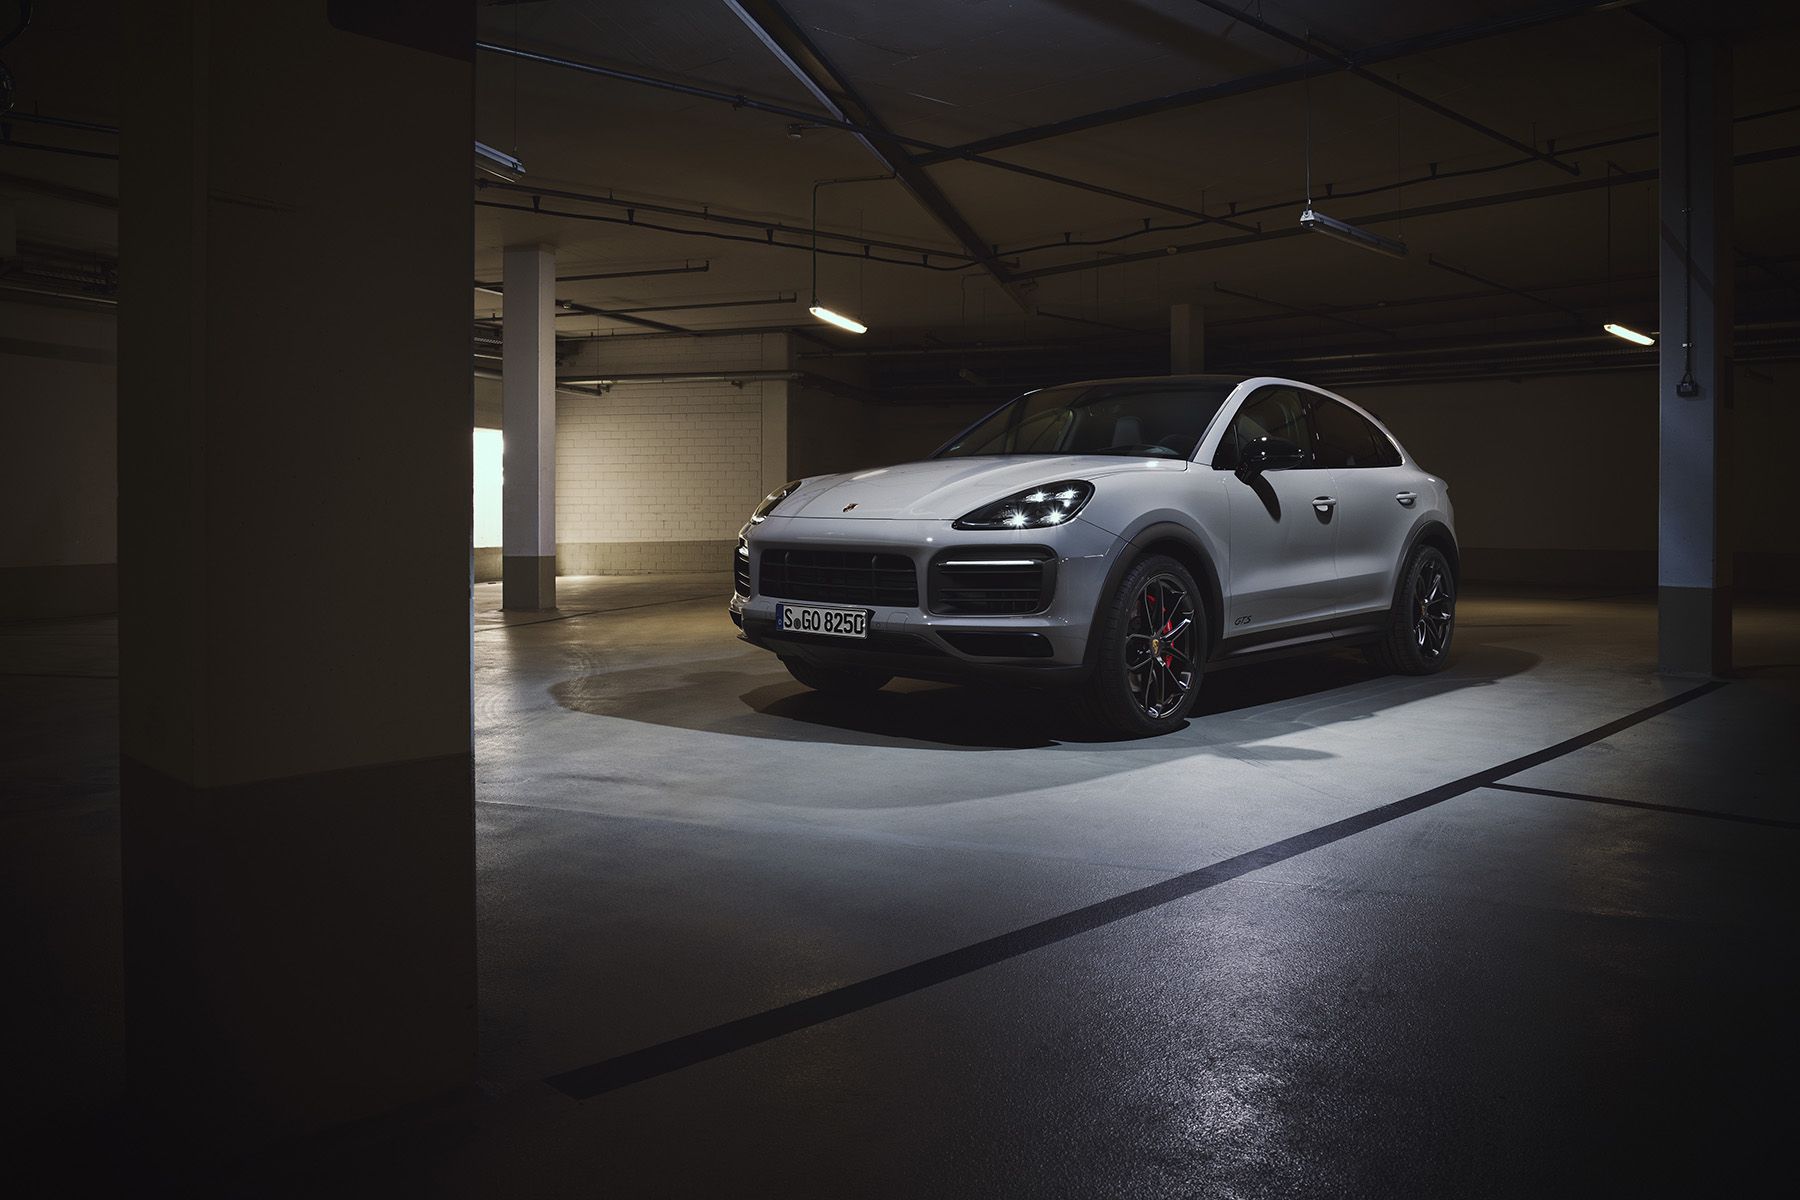 The last V8 Porsche Cayenne GTS goes out with a roar - Executive